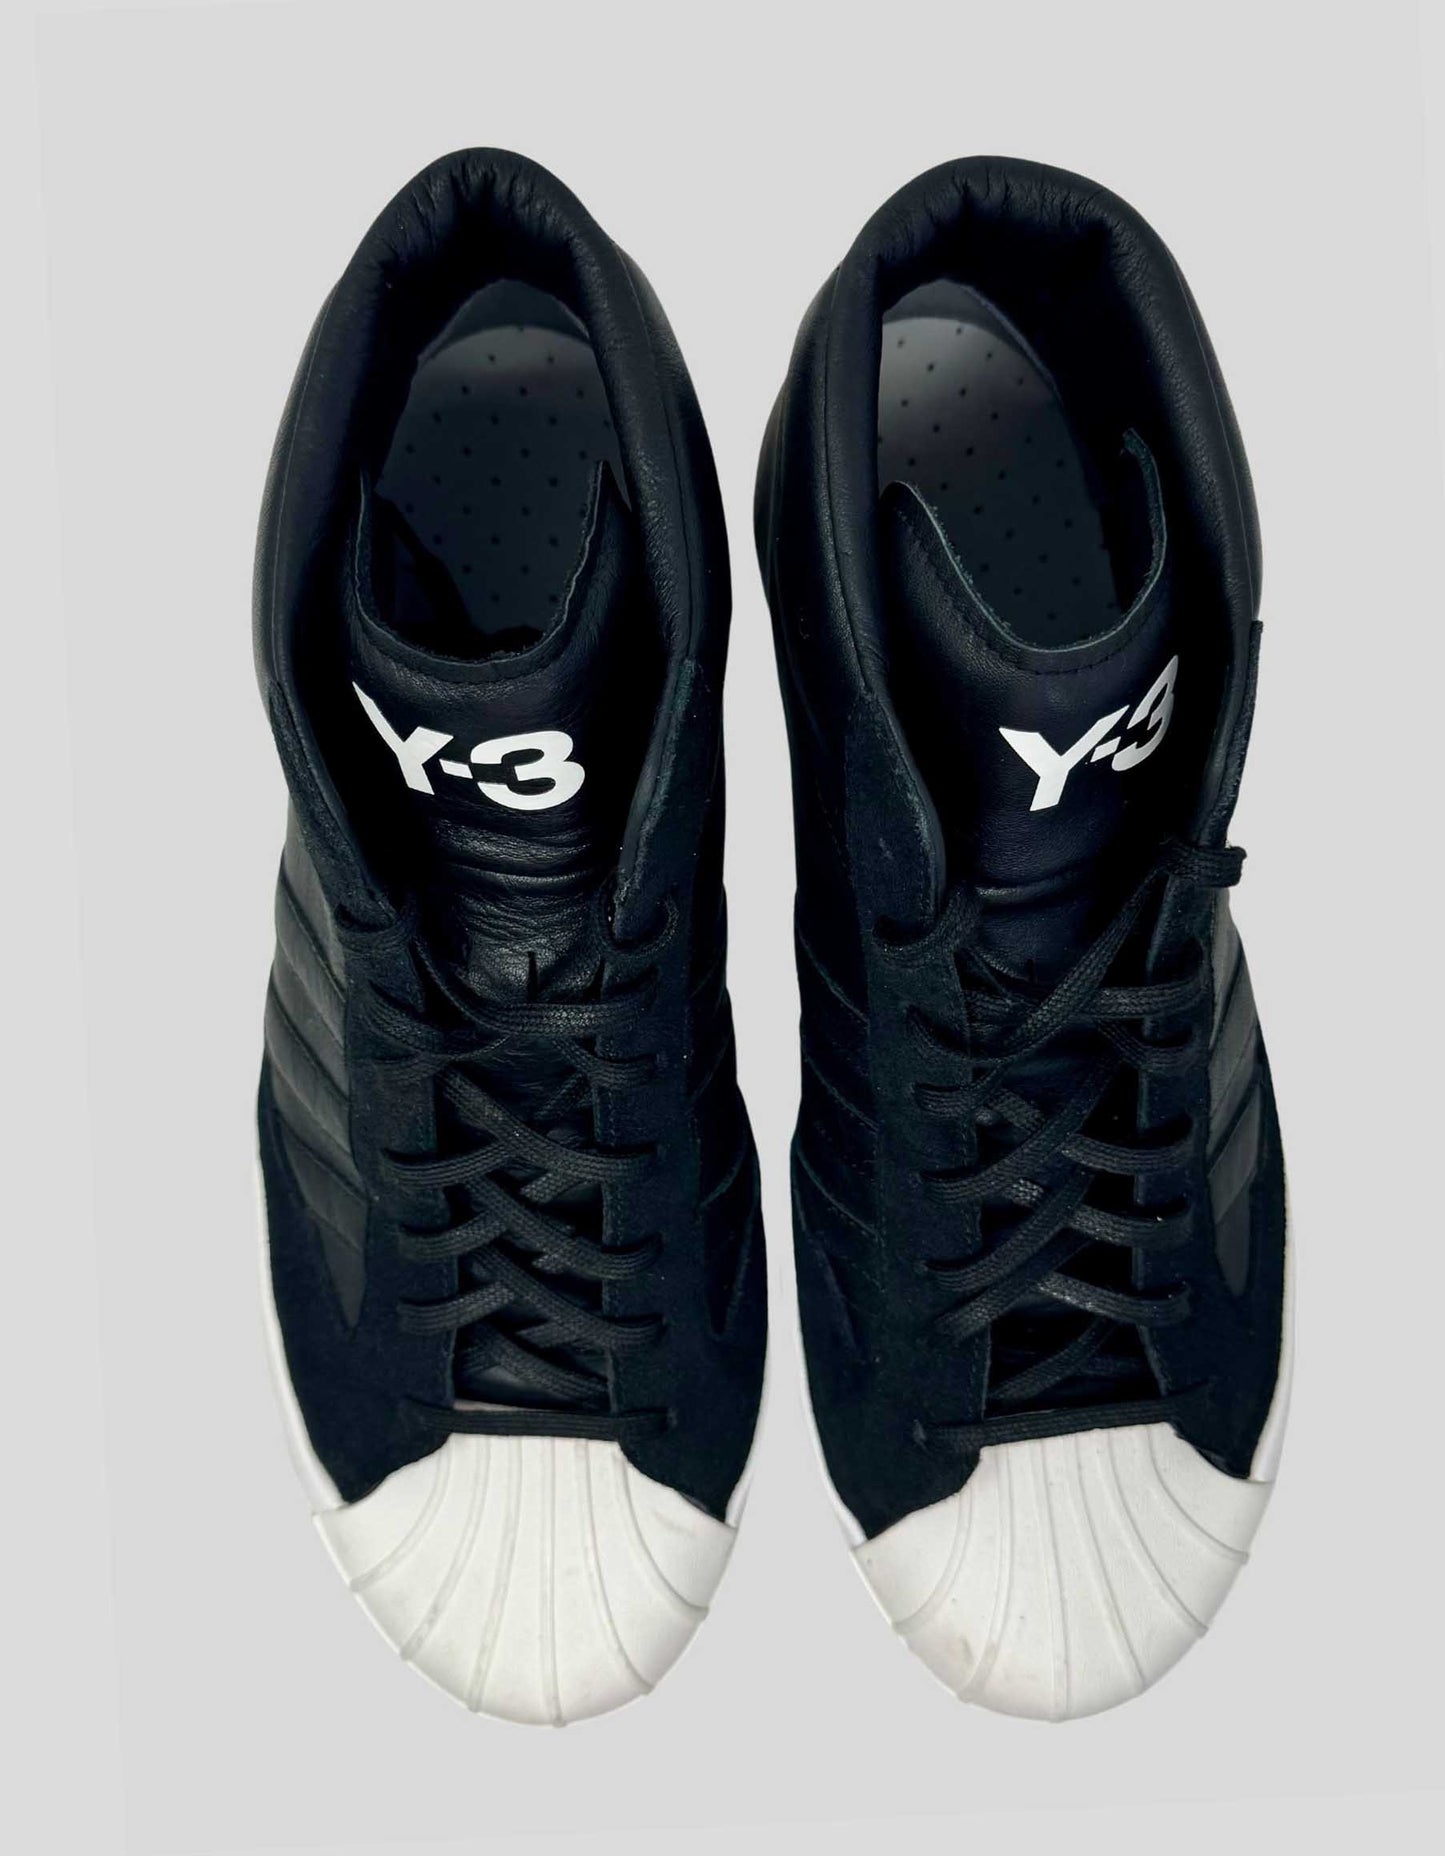 Y-3 Leather Sneakers - 11 US